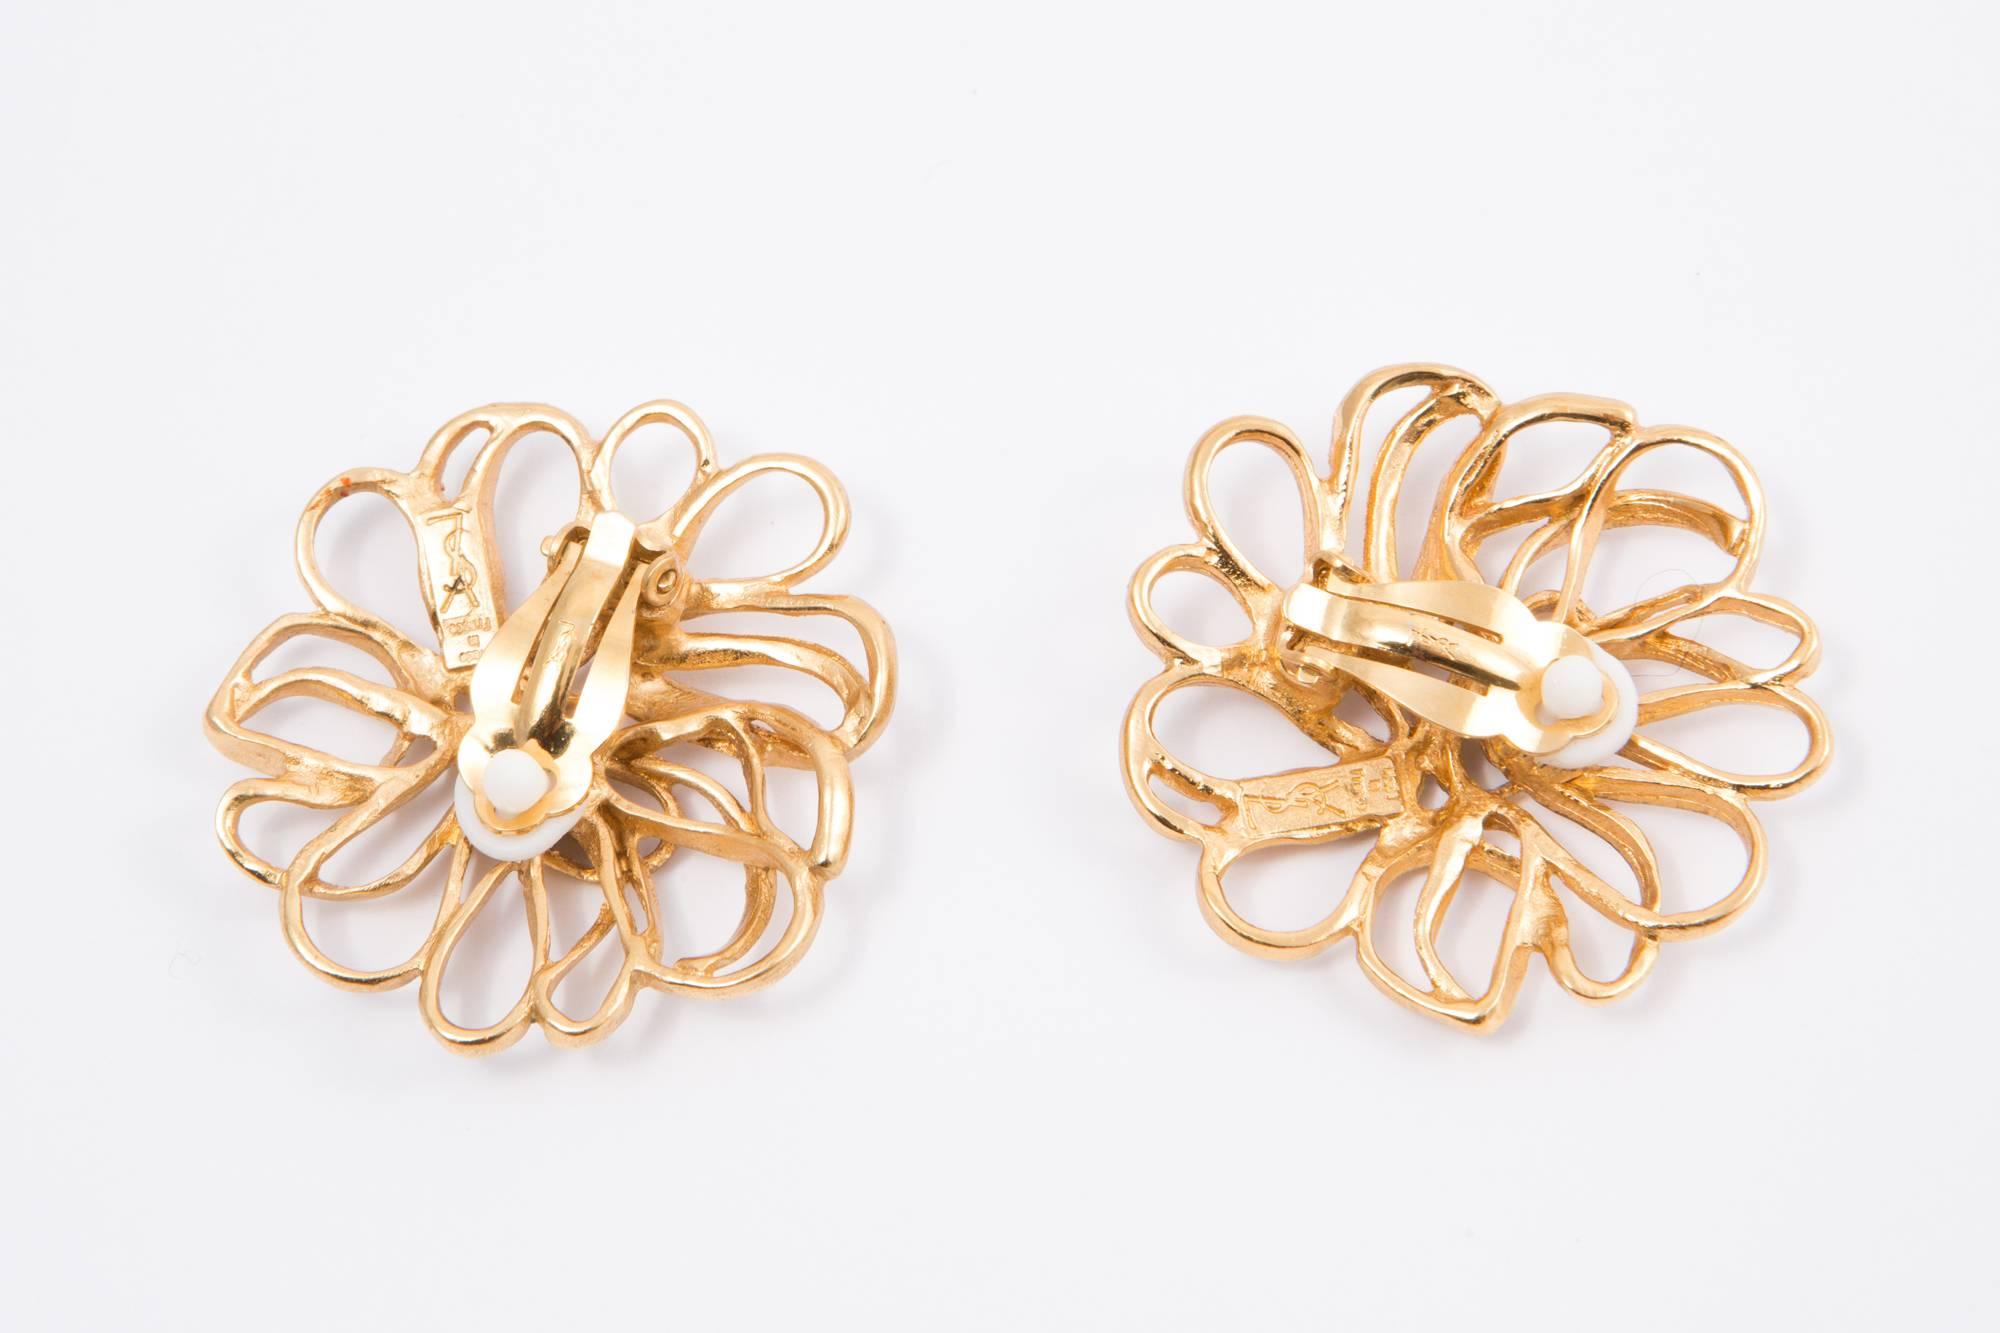 Yves Saint Laurent flower gold tone metal earrings featuring a clip on fastening, back plaque logo YSL.
1,9 in. (5cm) X 1,9 in. (5cm)
 In excellent vintage condition. Made in France.  
We guarantee you will receive this gorgeous item as described